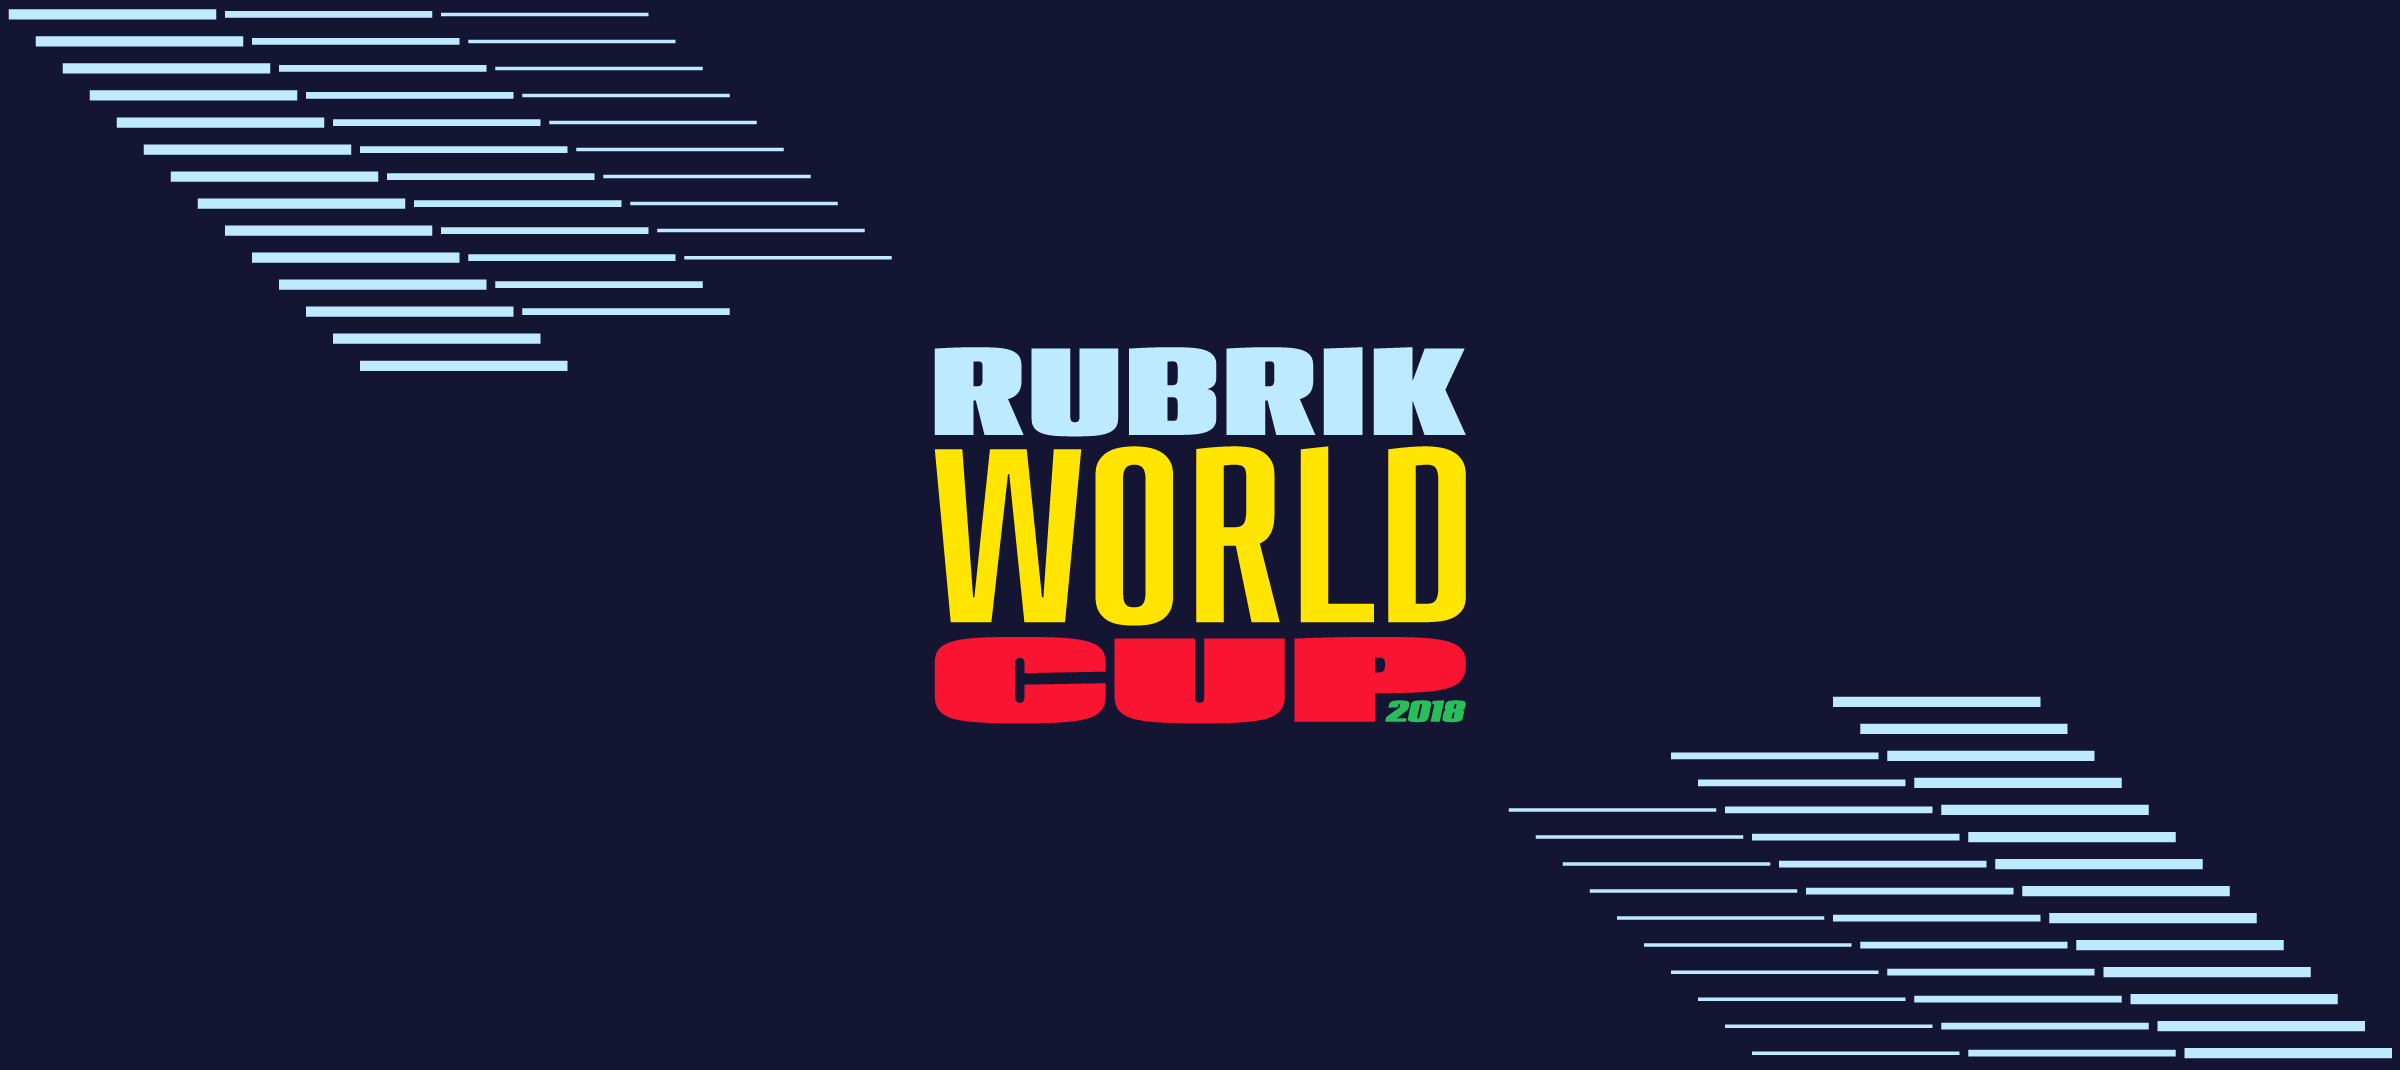 Red Bull Rubik's Cube World Cup 2021 – Daily Updates